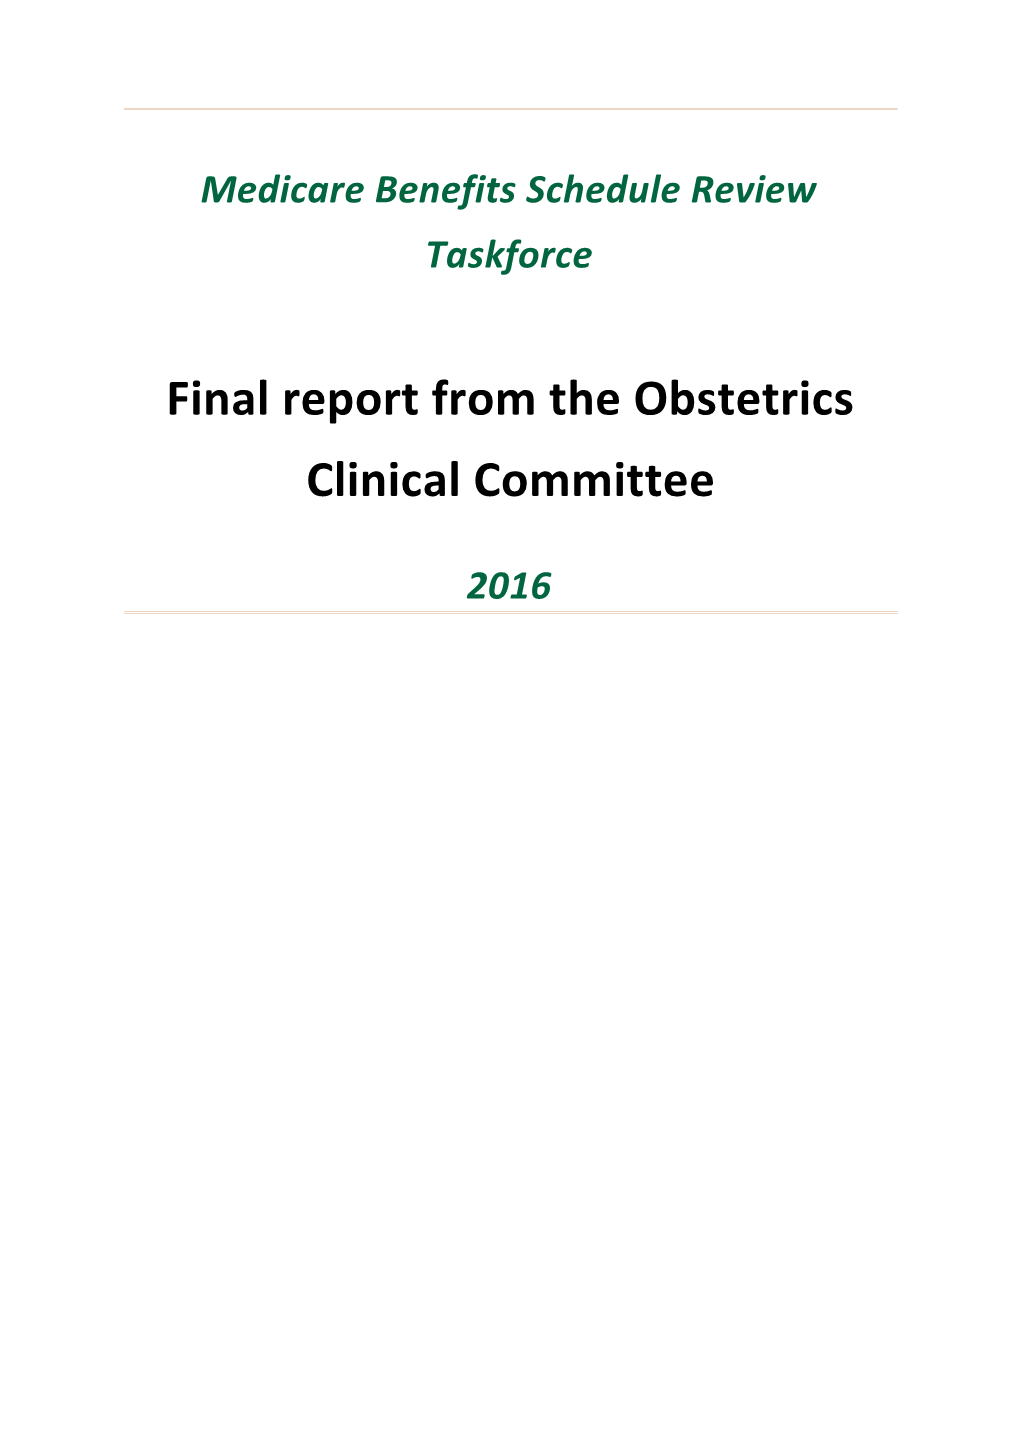 Medicare Benefits Schedule Review Taskforce Report from the Obstetrics Clinical Committee